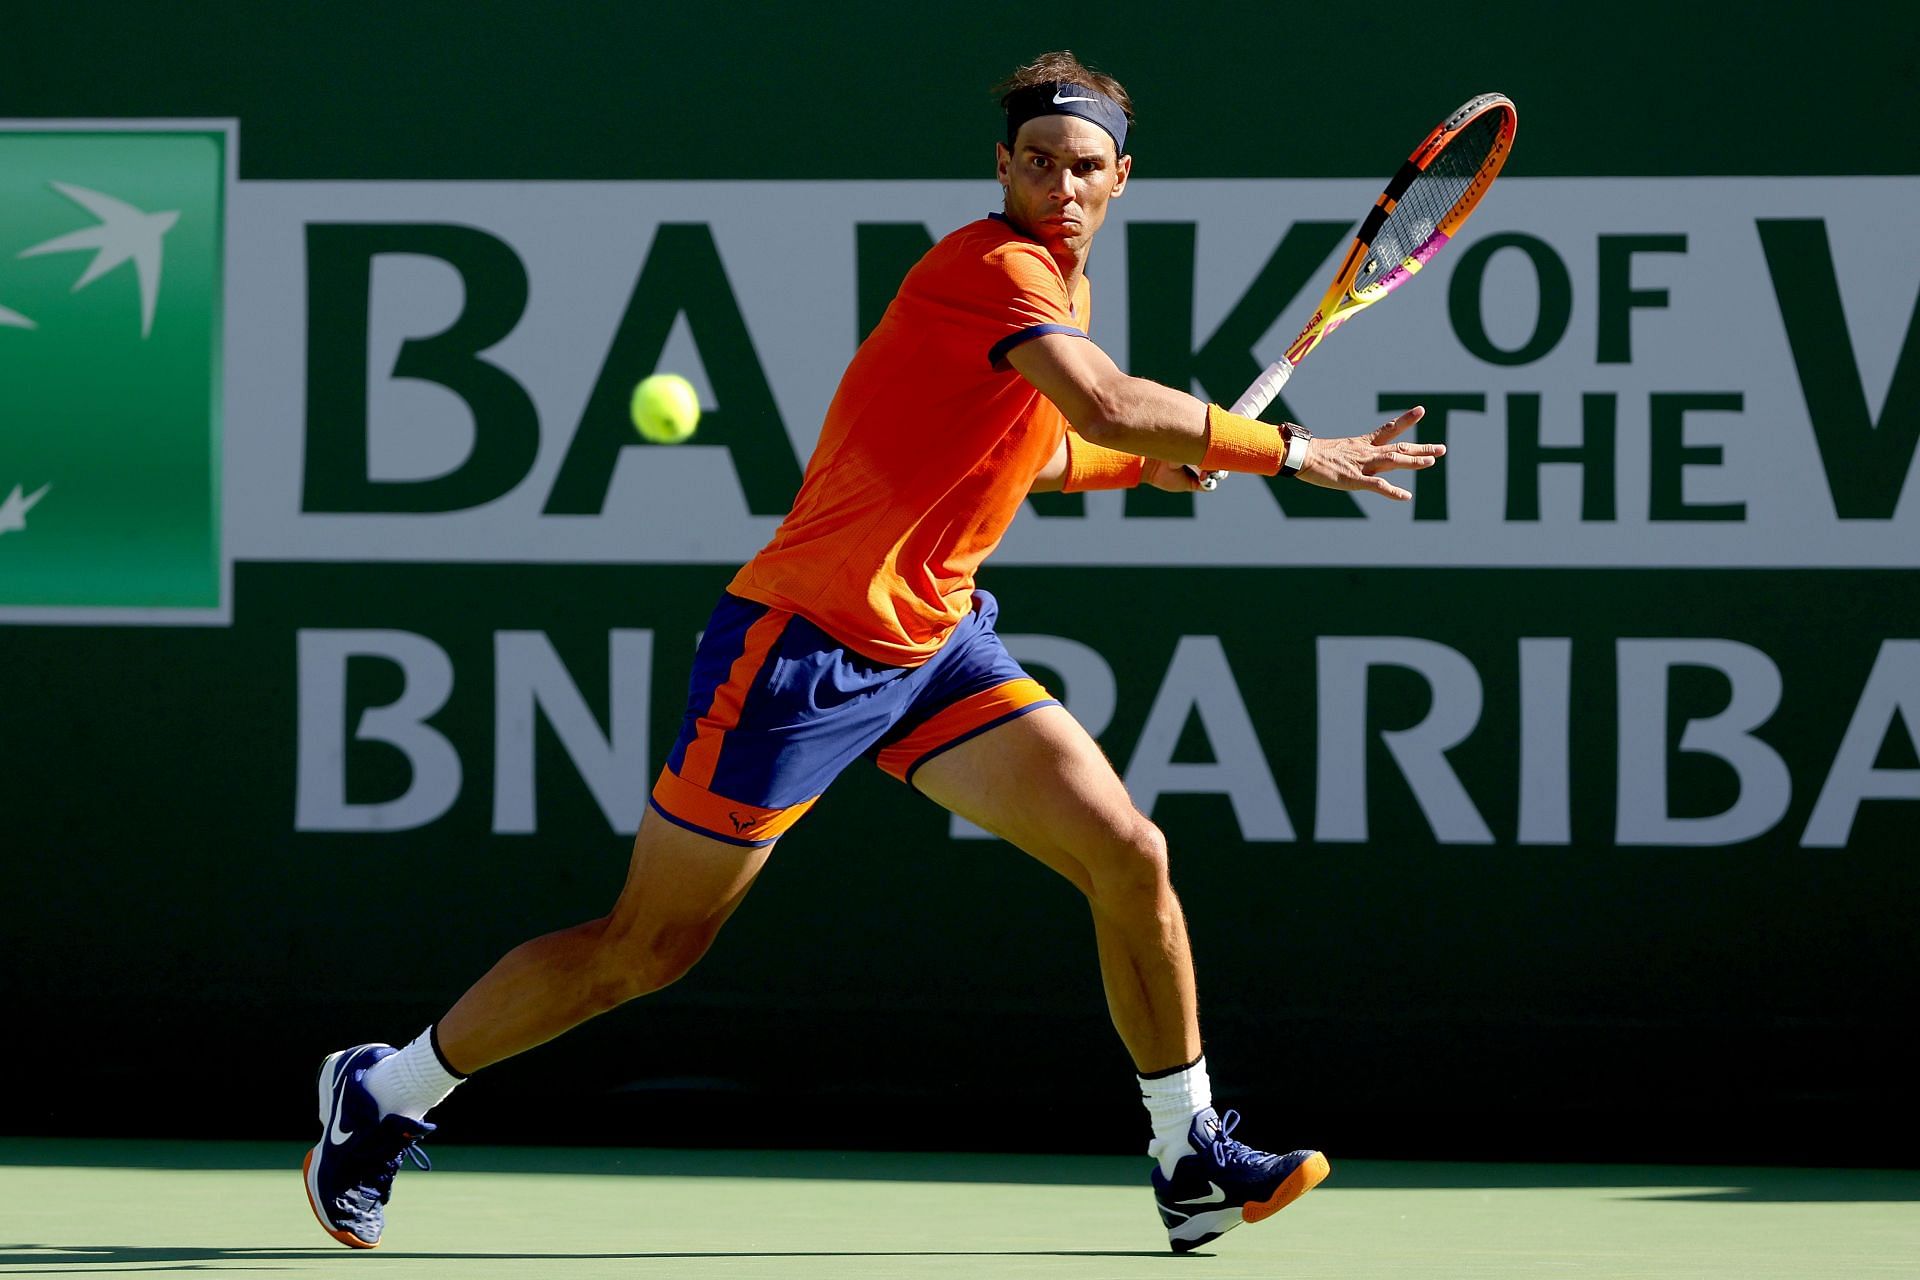 Rafael Nadal takes on Carlos Alcaraz in the semifinals of the Indian Wells Masters